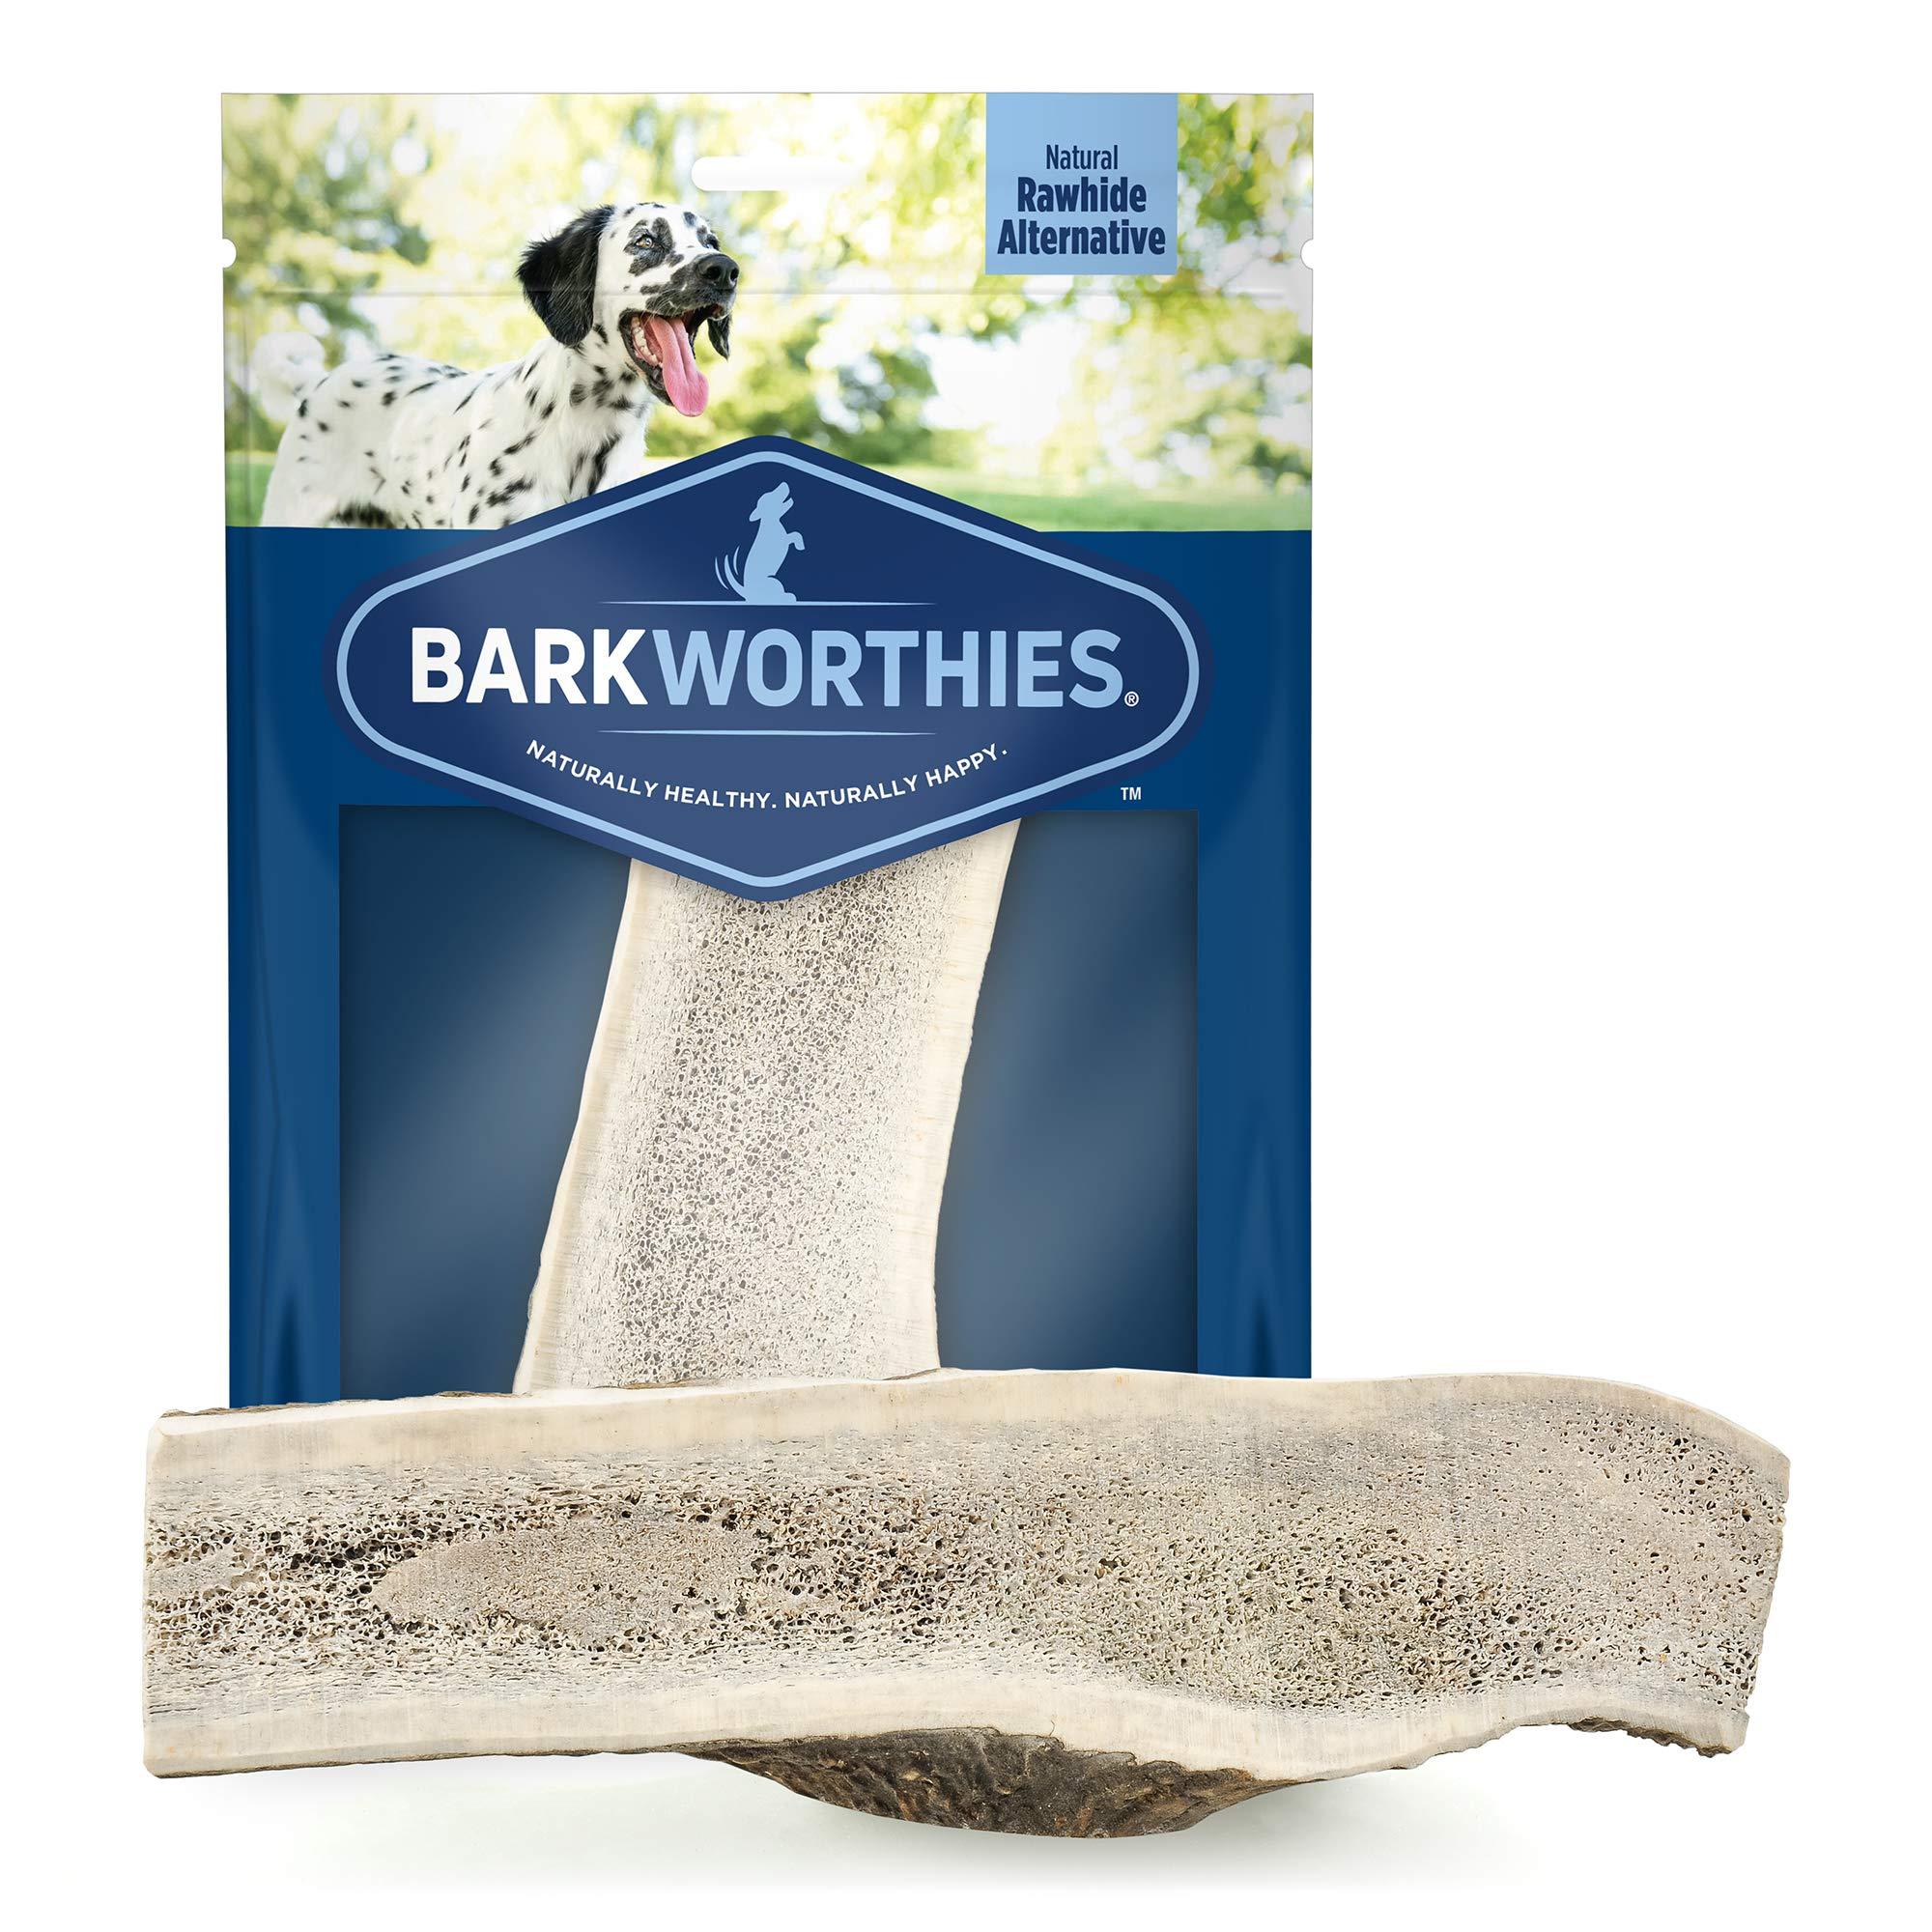 Barkworthies Hand Selected Naturally Shed Extra Large Split Elk Antler (Single Antler) - Long Lasting, Odor Free Dog Chew for XL Extra Large Dogs - No Chemical Treatments, No Added Preservatives